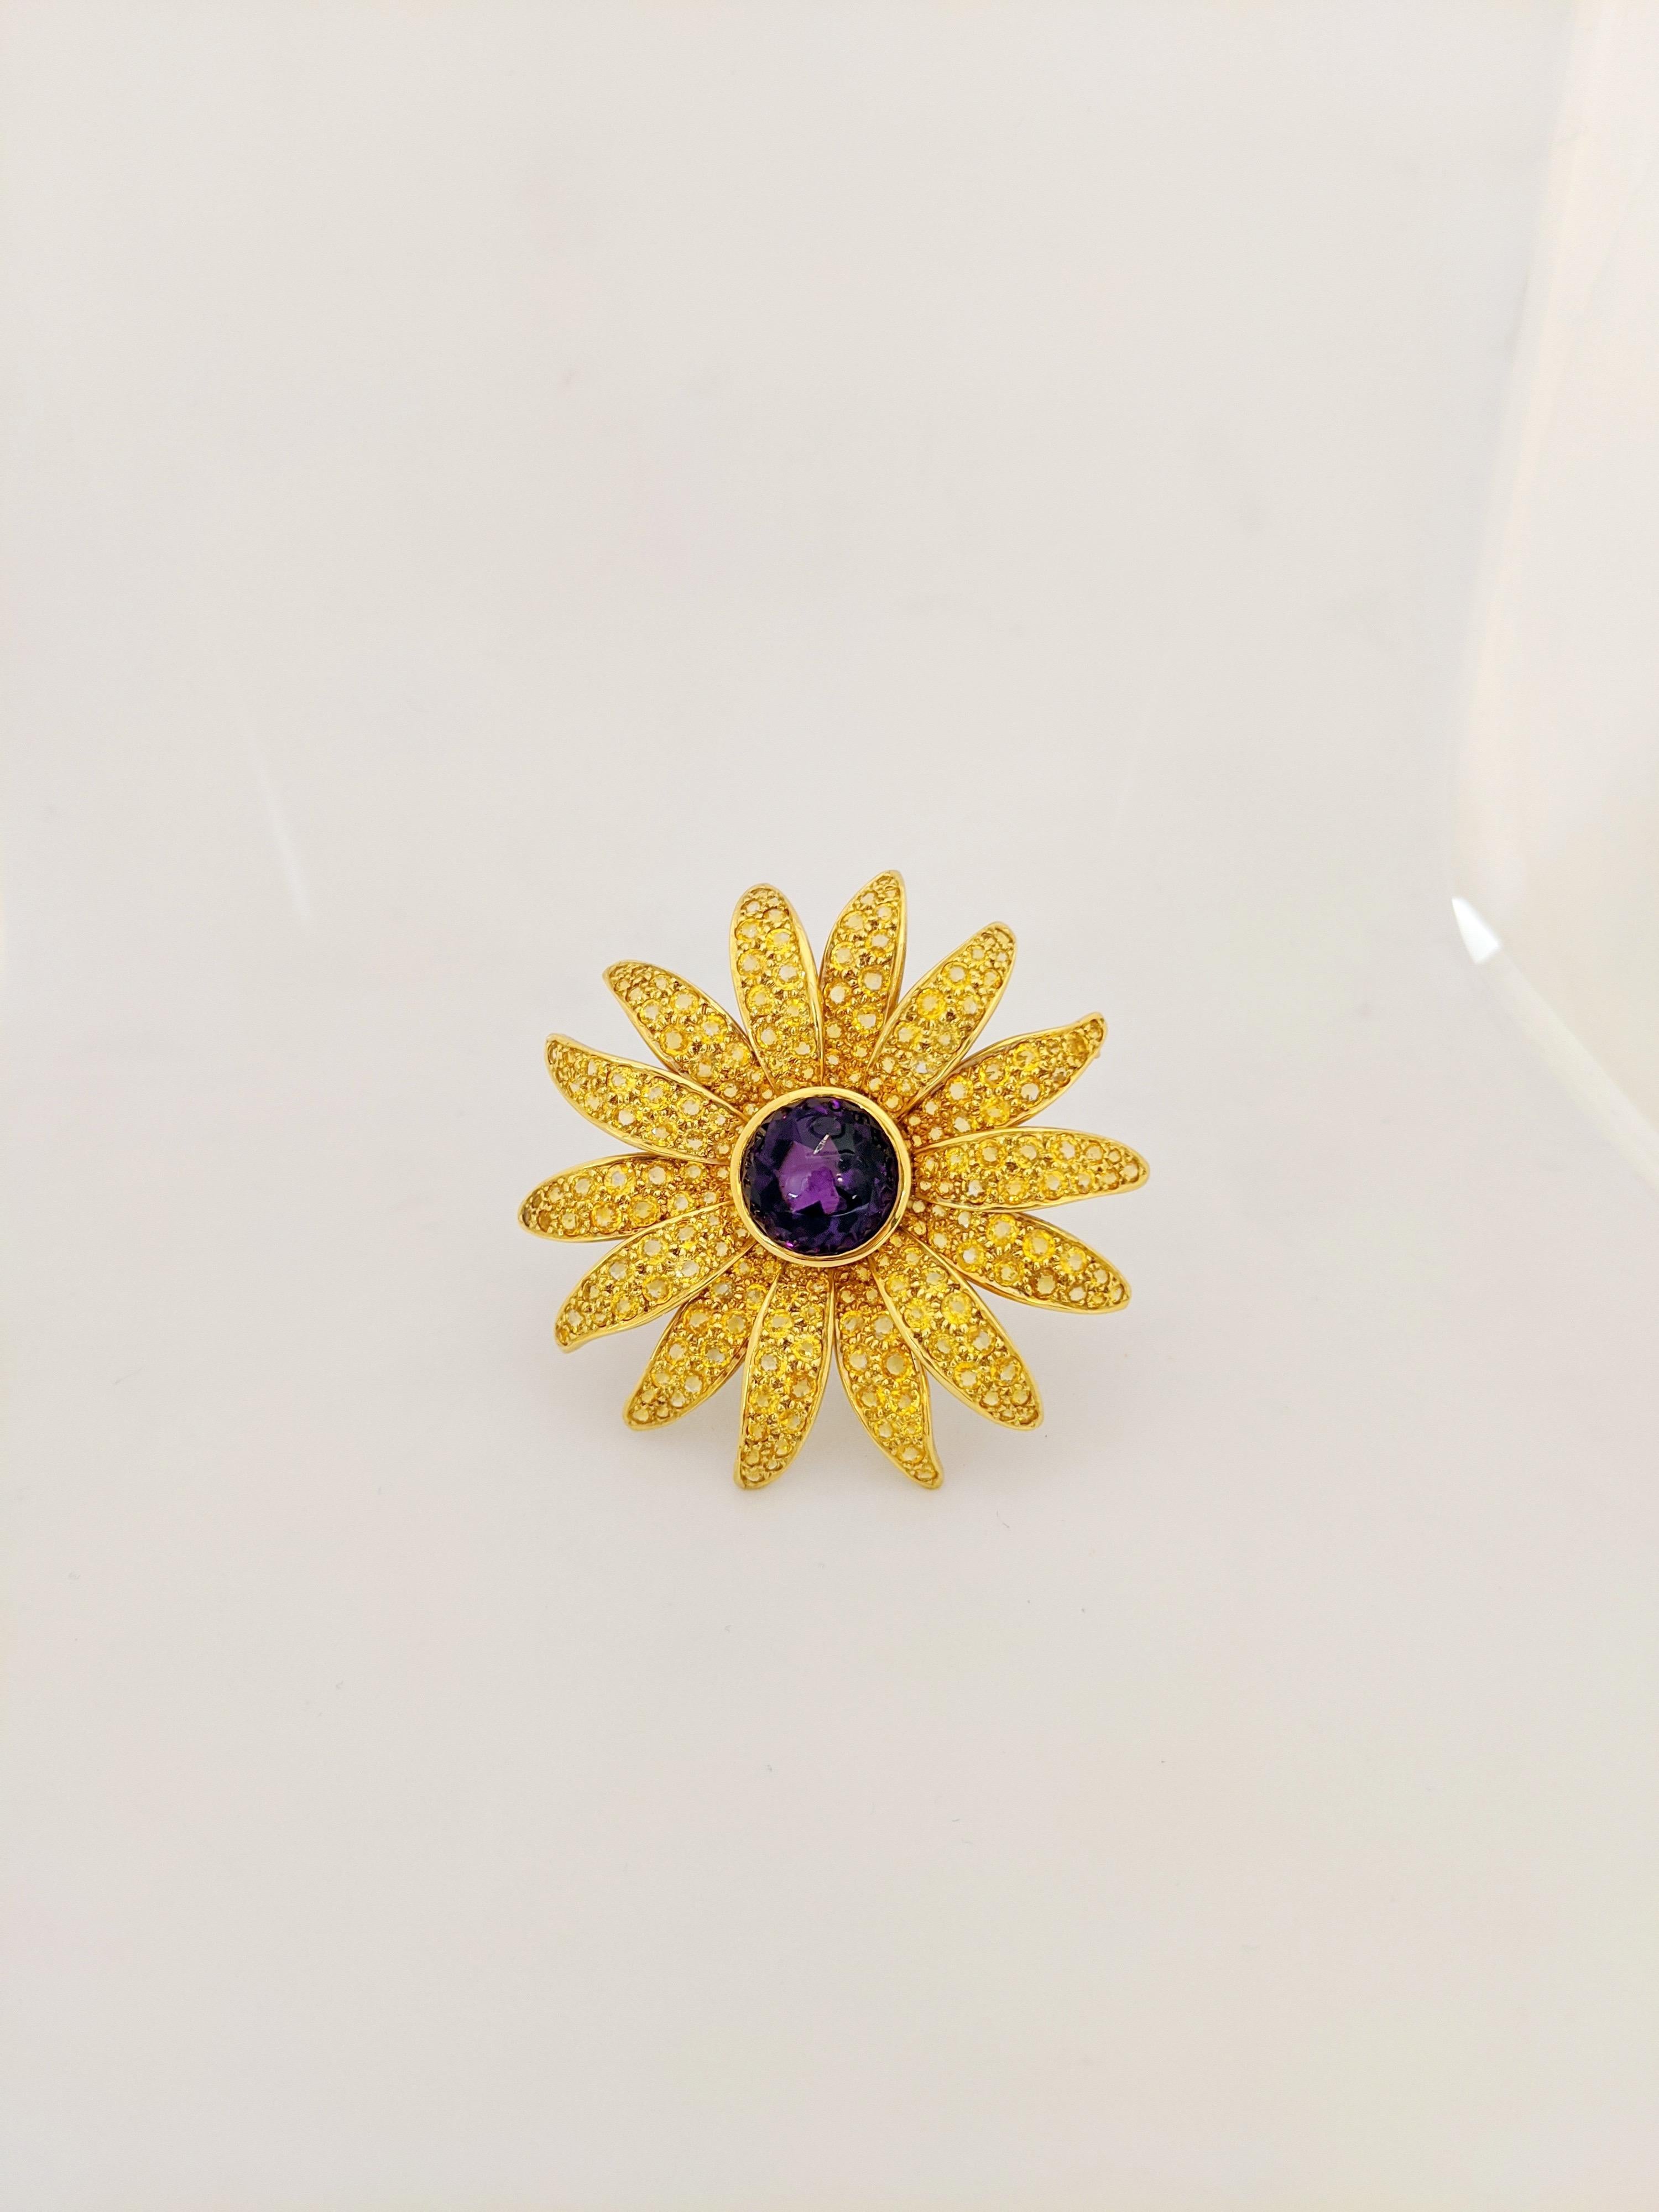 Round Cut 18kt Gold Sunflower Brooch, 20.24ct Yellow Sapphires and 15.58 Carat Amethyst